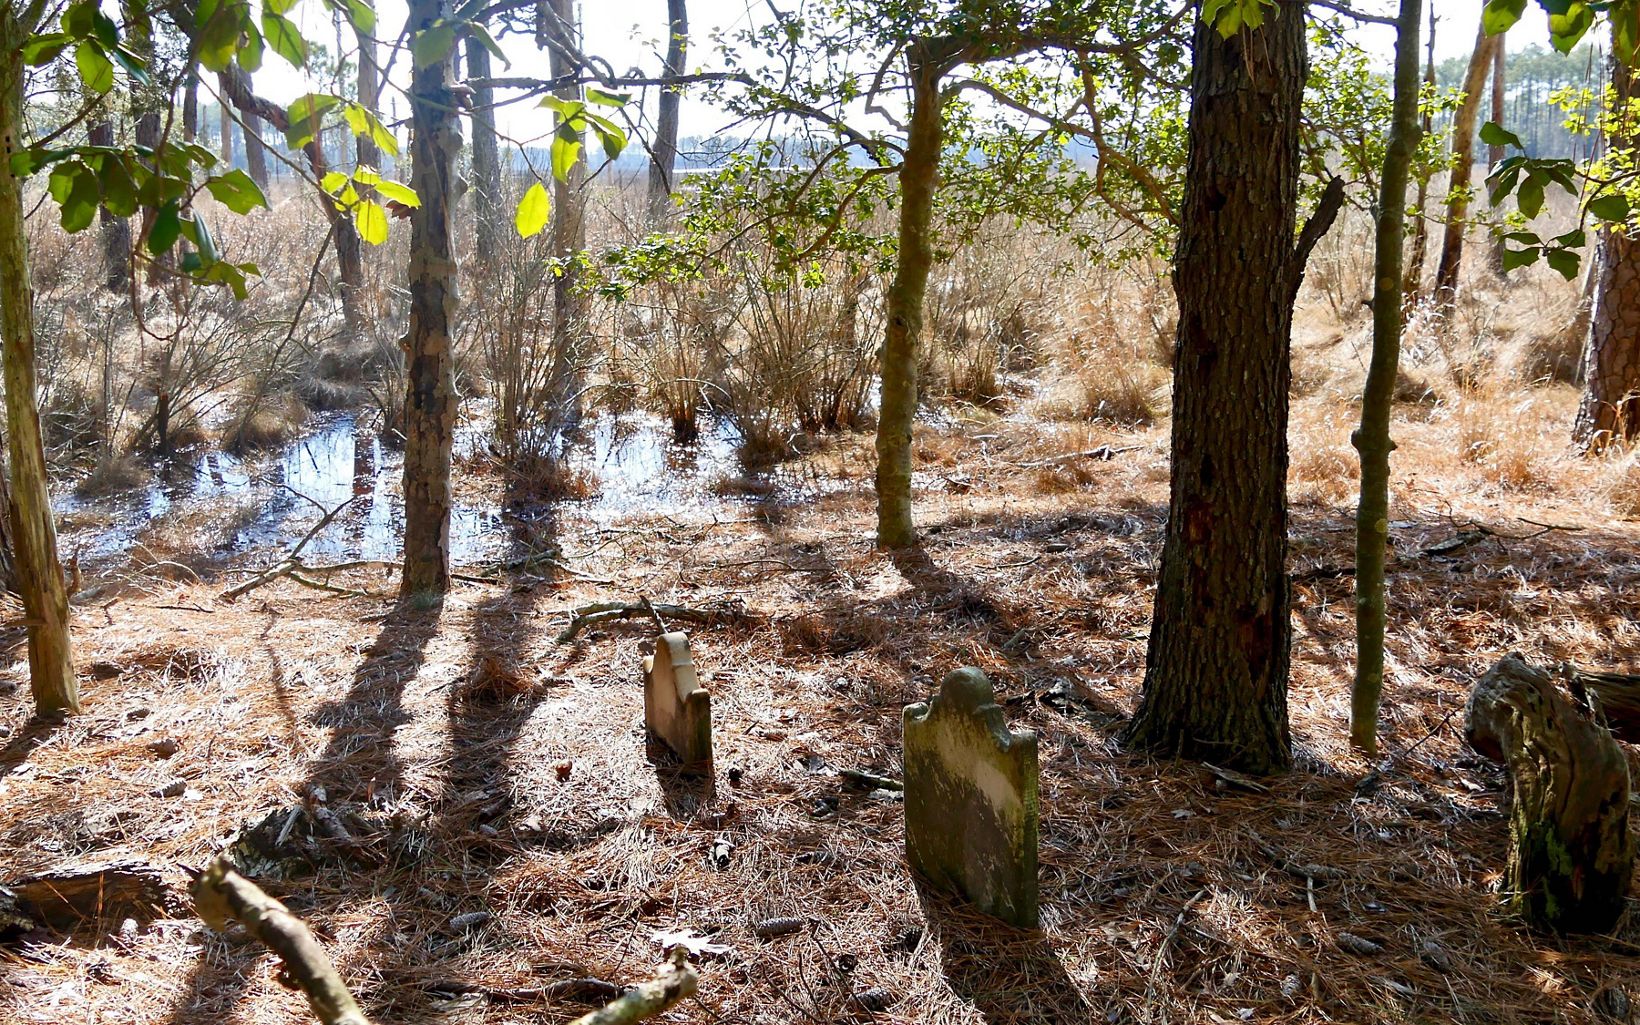 Though the Robson family cemetery may be lost to ravages of time and rising waters, knowledge of the place and those buried there will be preserved.